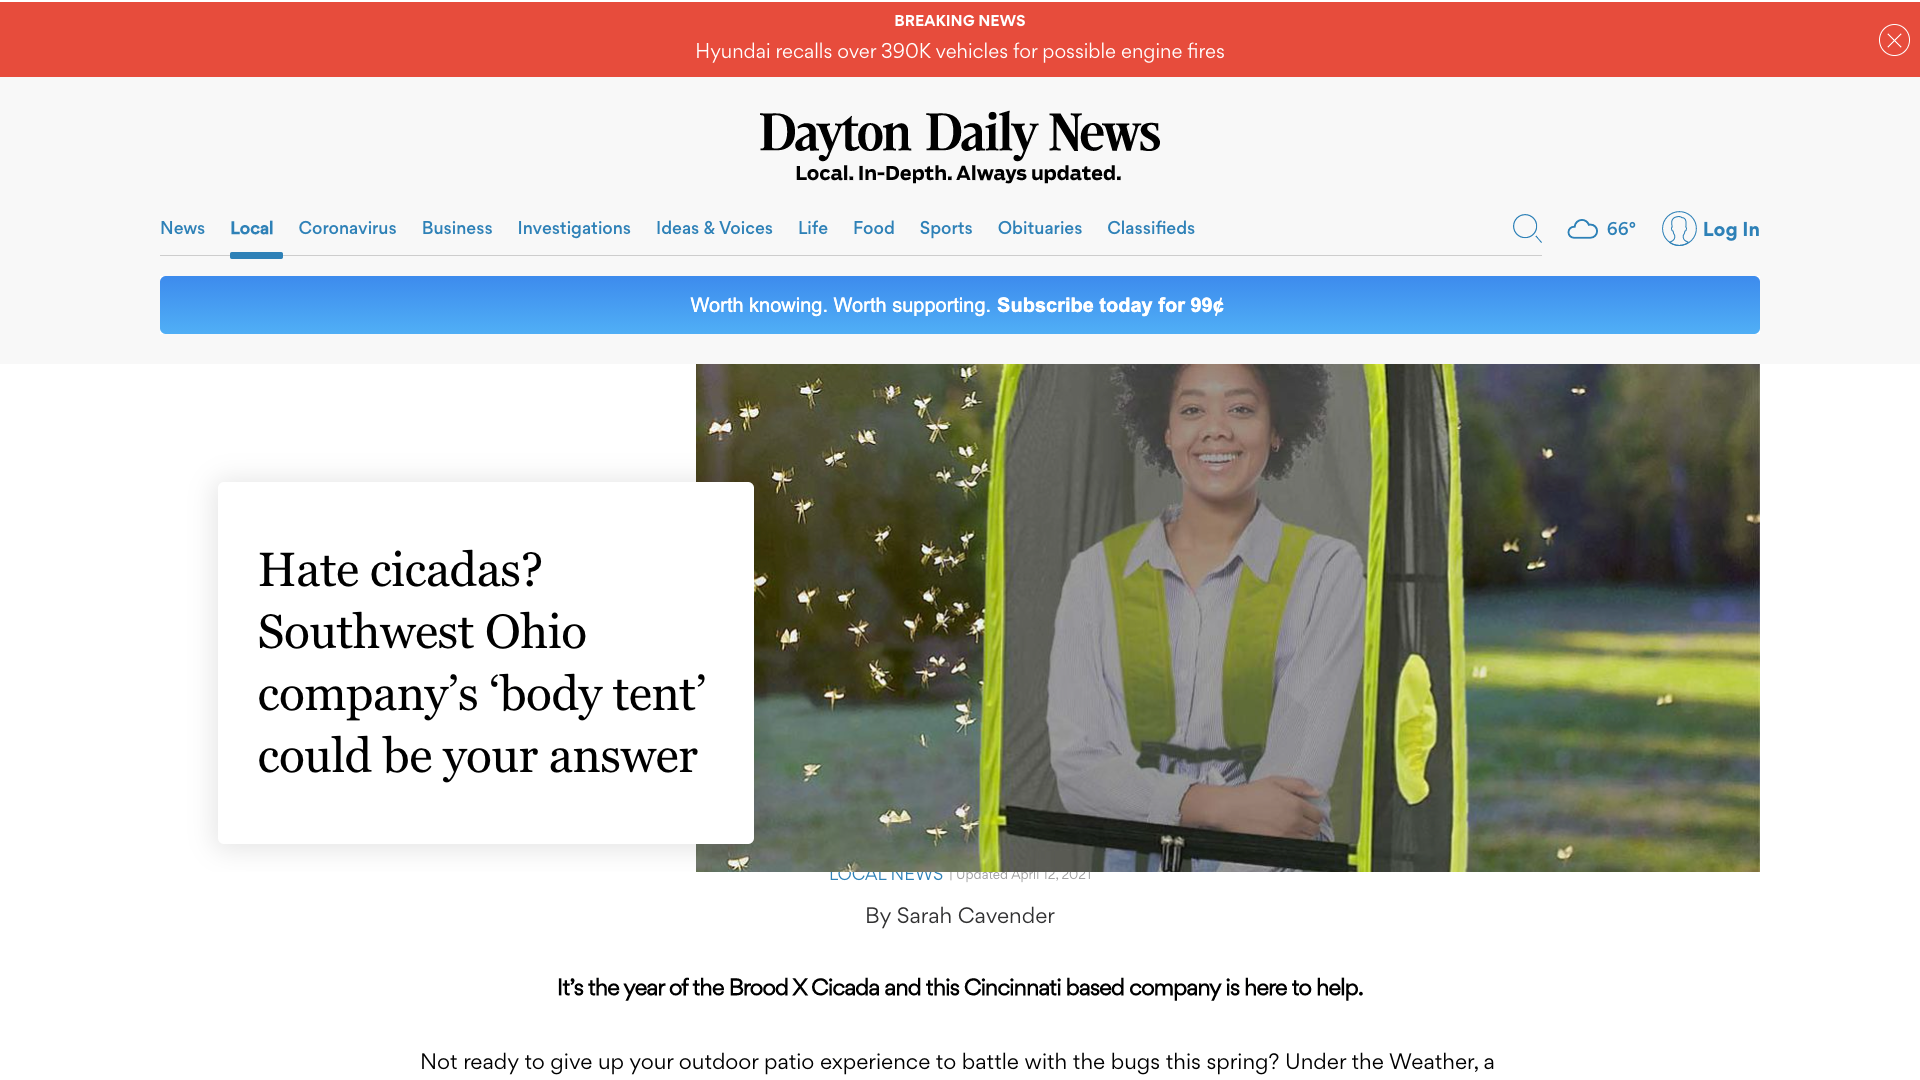 Dayton Daily News: Hate cicadas? Southwest Ohio company’s ‘body tent’ could be your answer